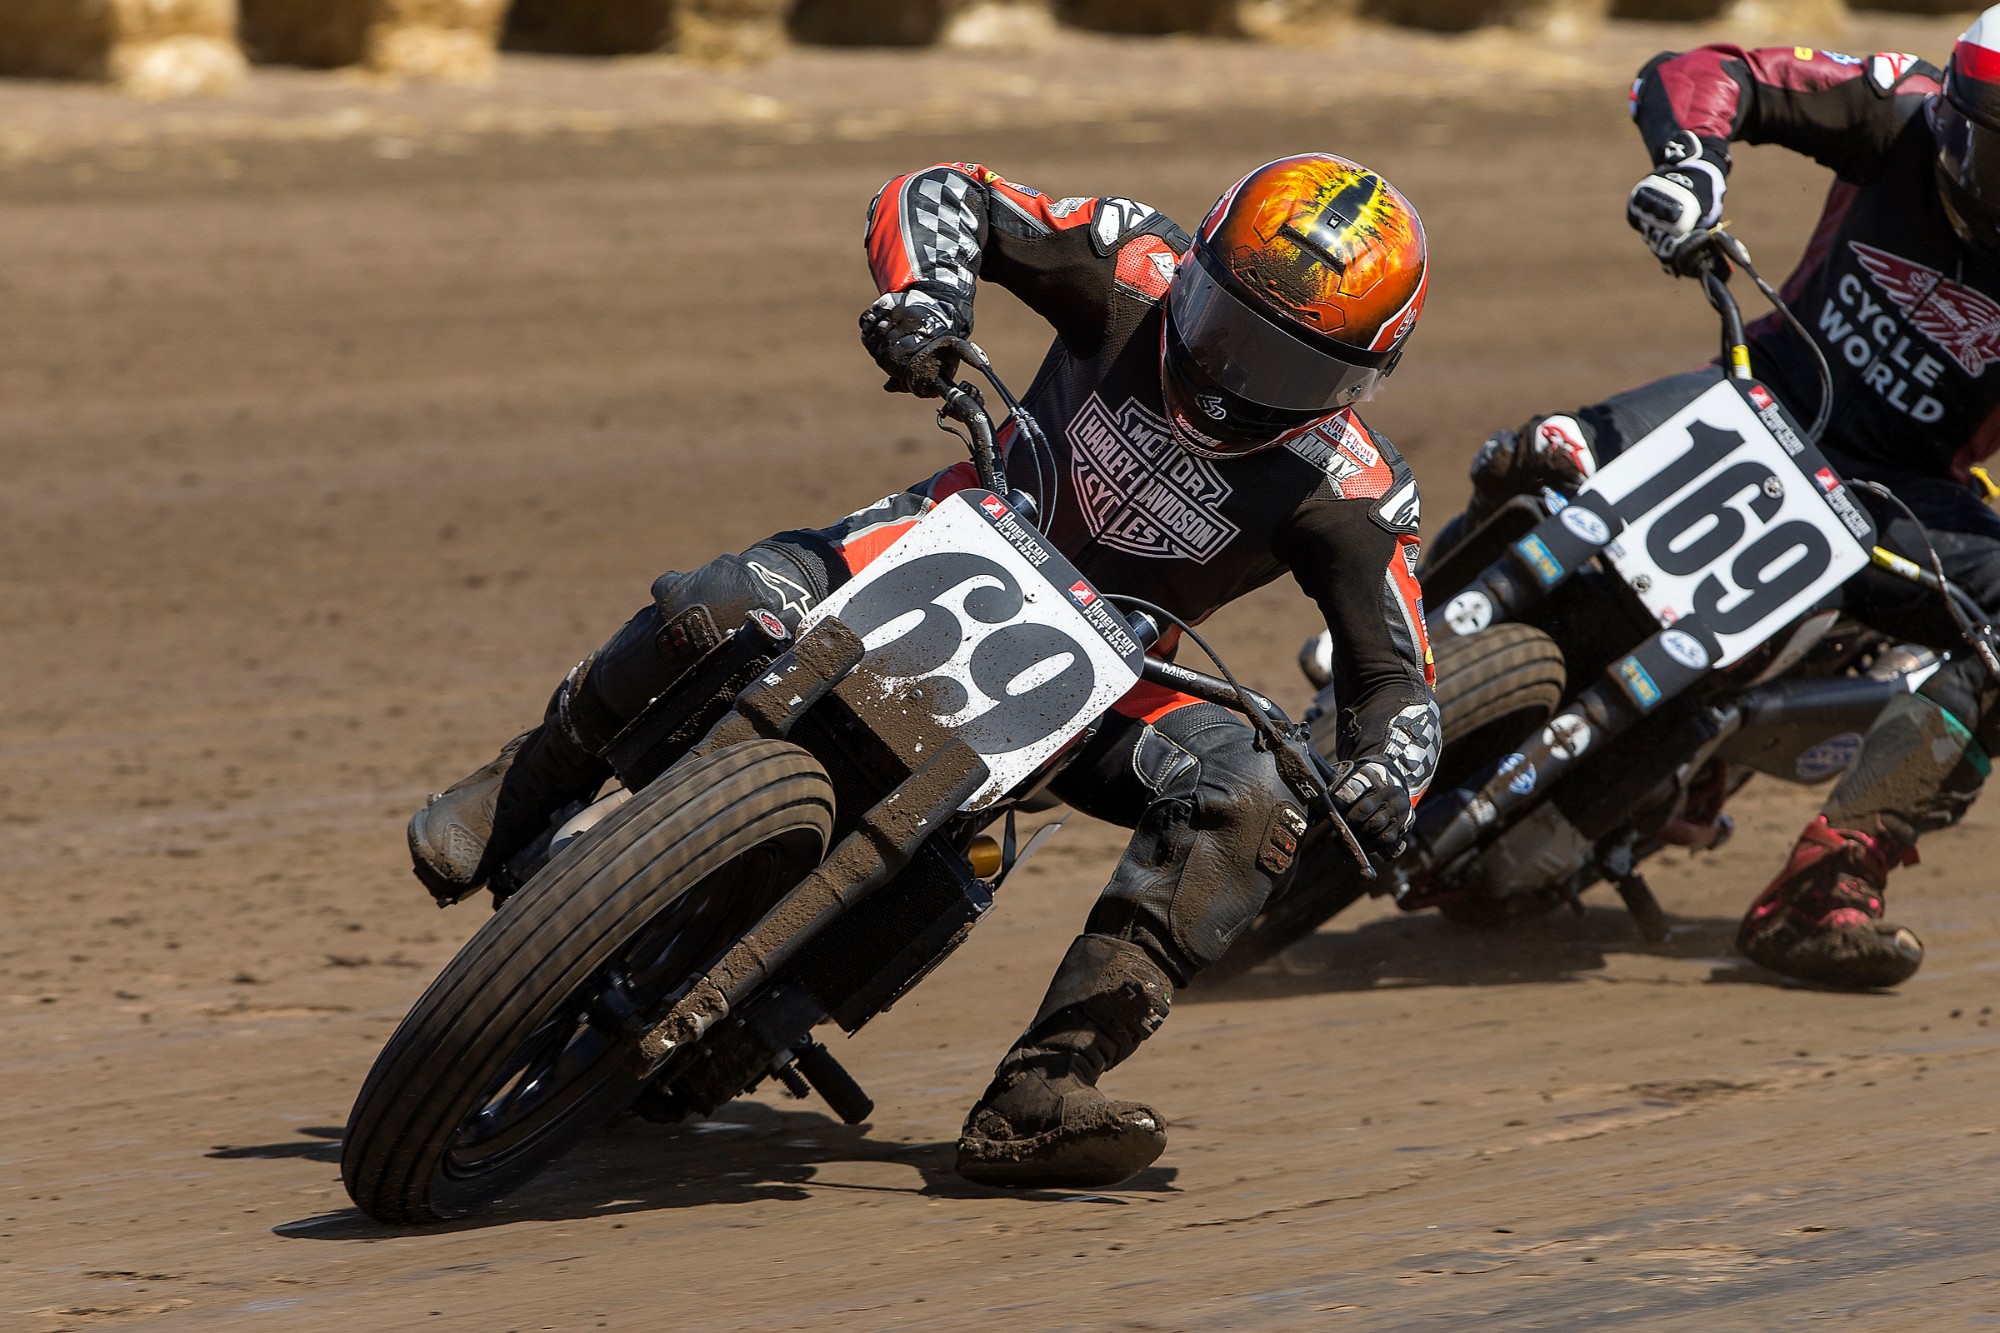 American Flat Track: Harley-Davidson Announces Its Factory Team Riders For 2019 Season